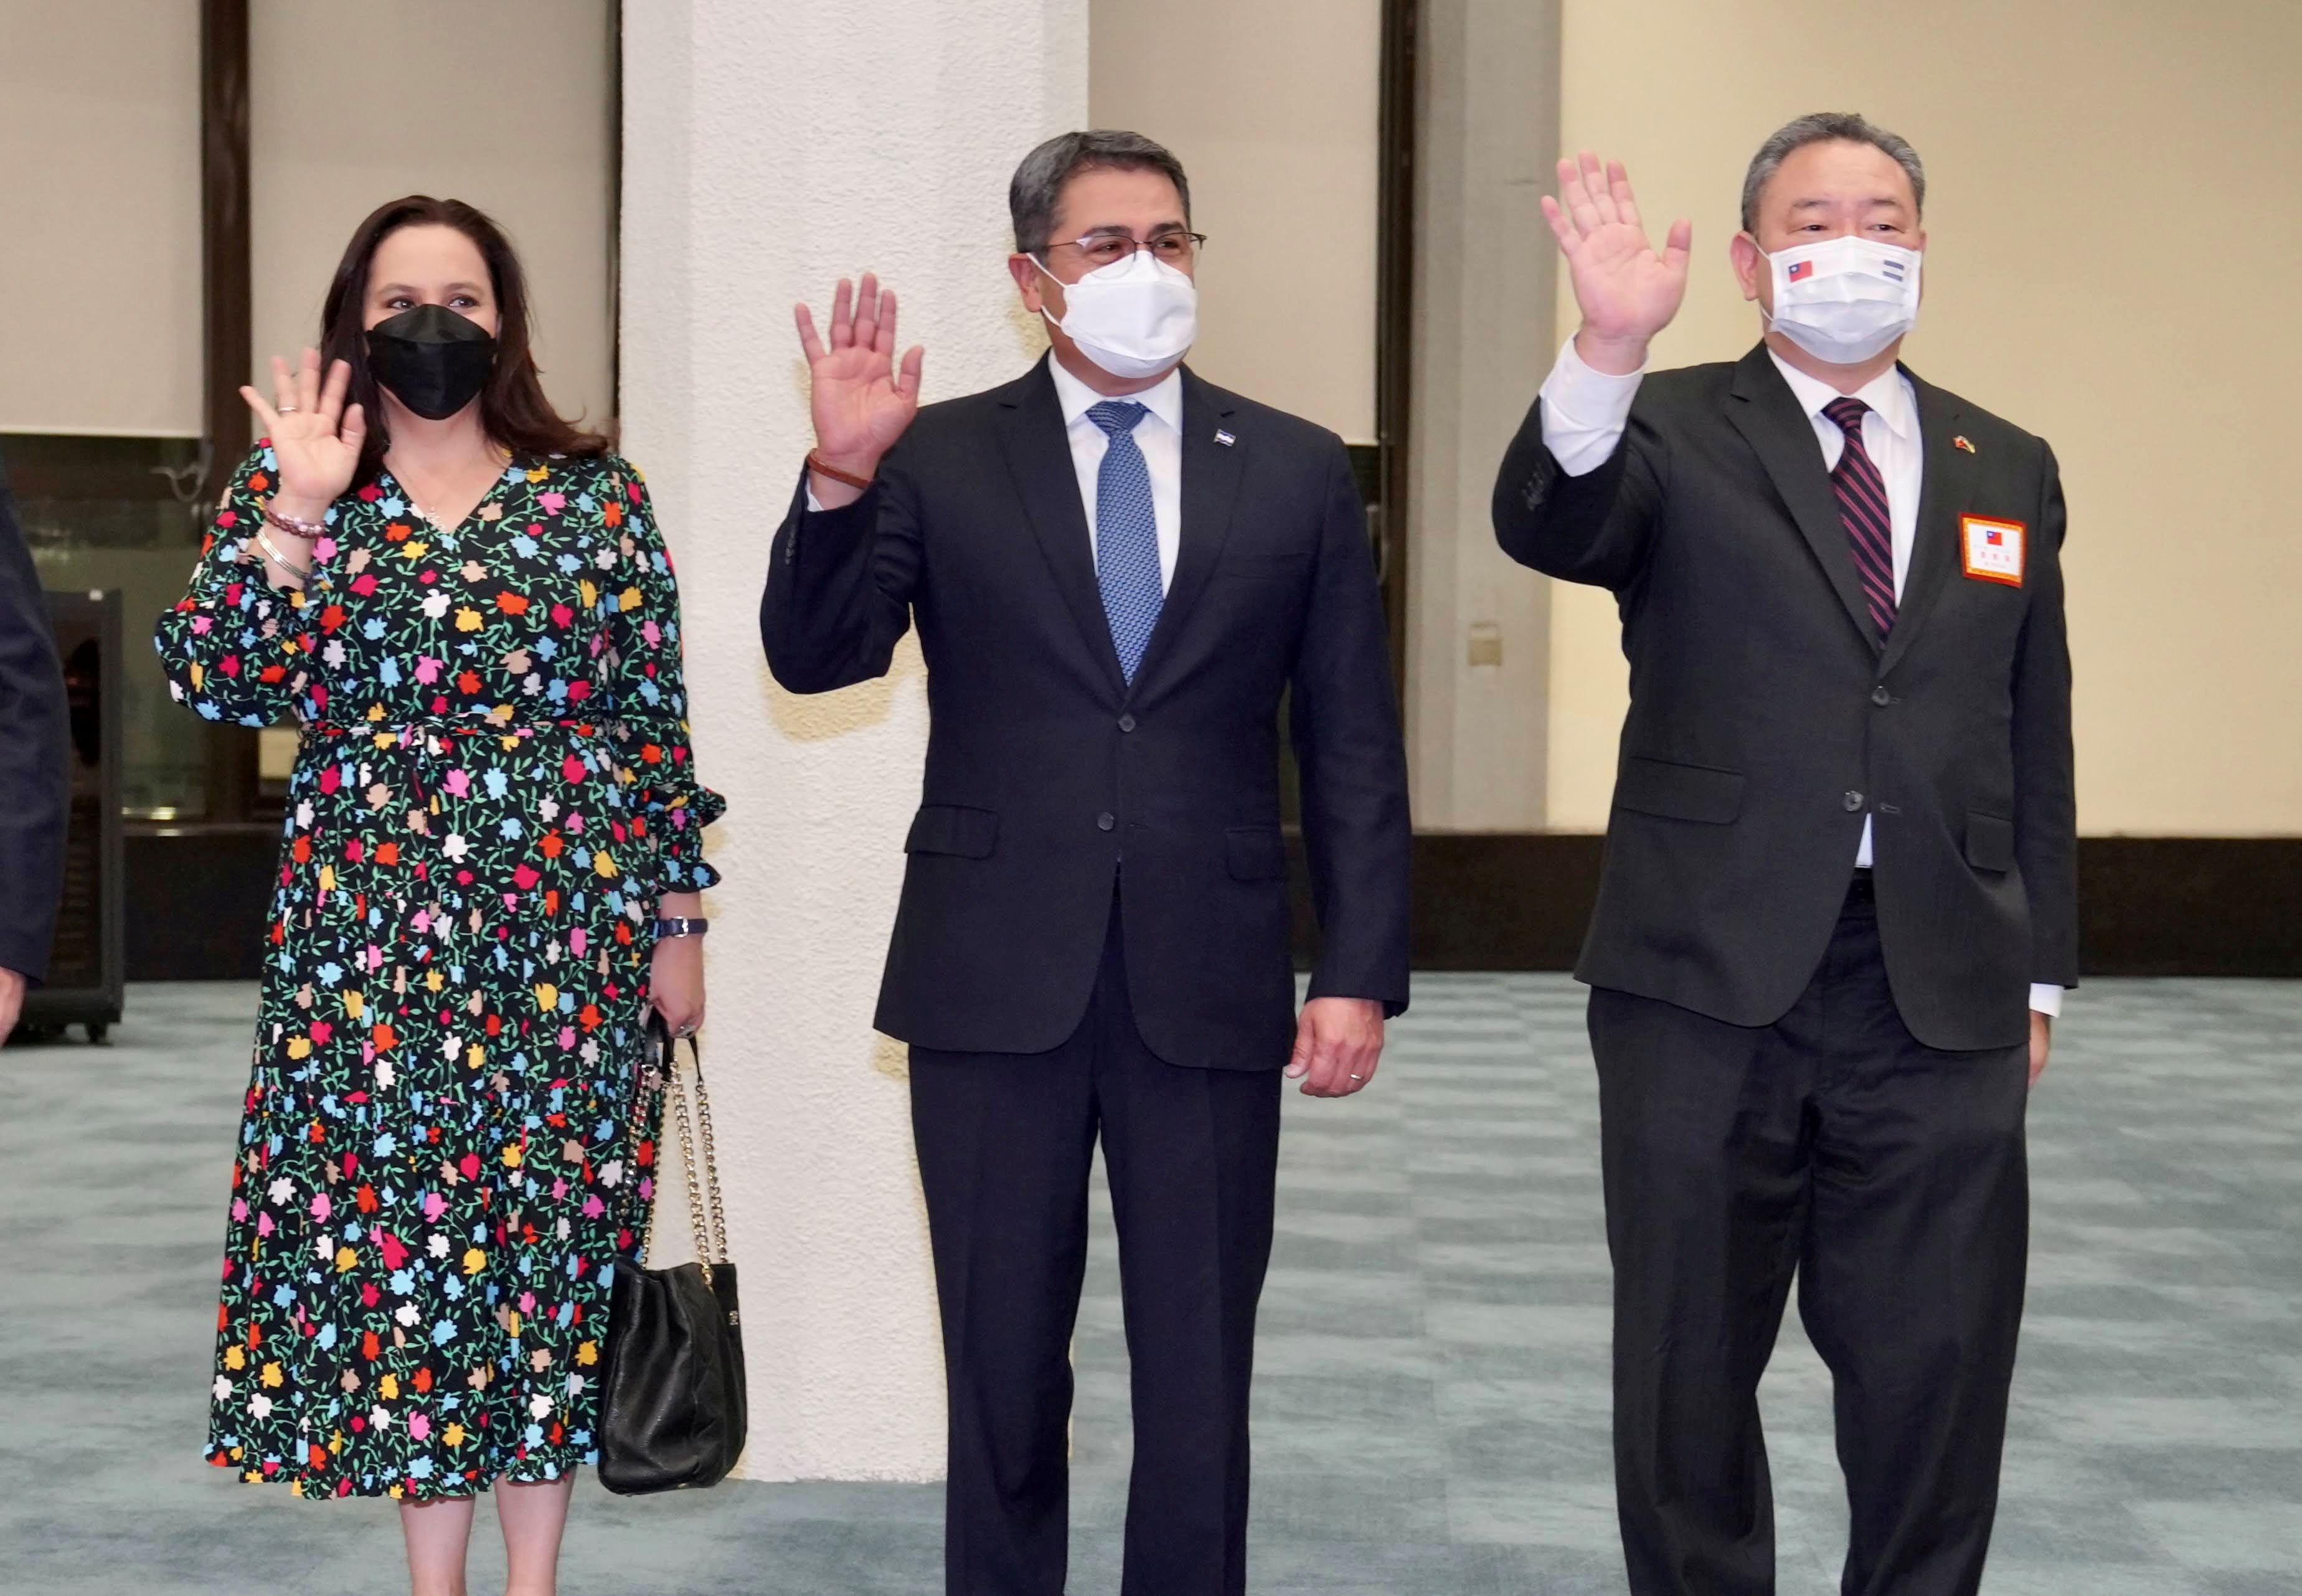 Honduran President Juan Orlando Hernandez and his wife Ana Garcia, wave to the media next to Alexander Tah-ray Yui, Taiwan's Vice Minister of Foreign Affairs, upon their arrival at Taoyuan International Airport in Taoyuan, Taiwan, November 12, 2021. Taiwan Ministry of Foreign Affairs/Handout via REUTERS